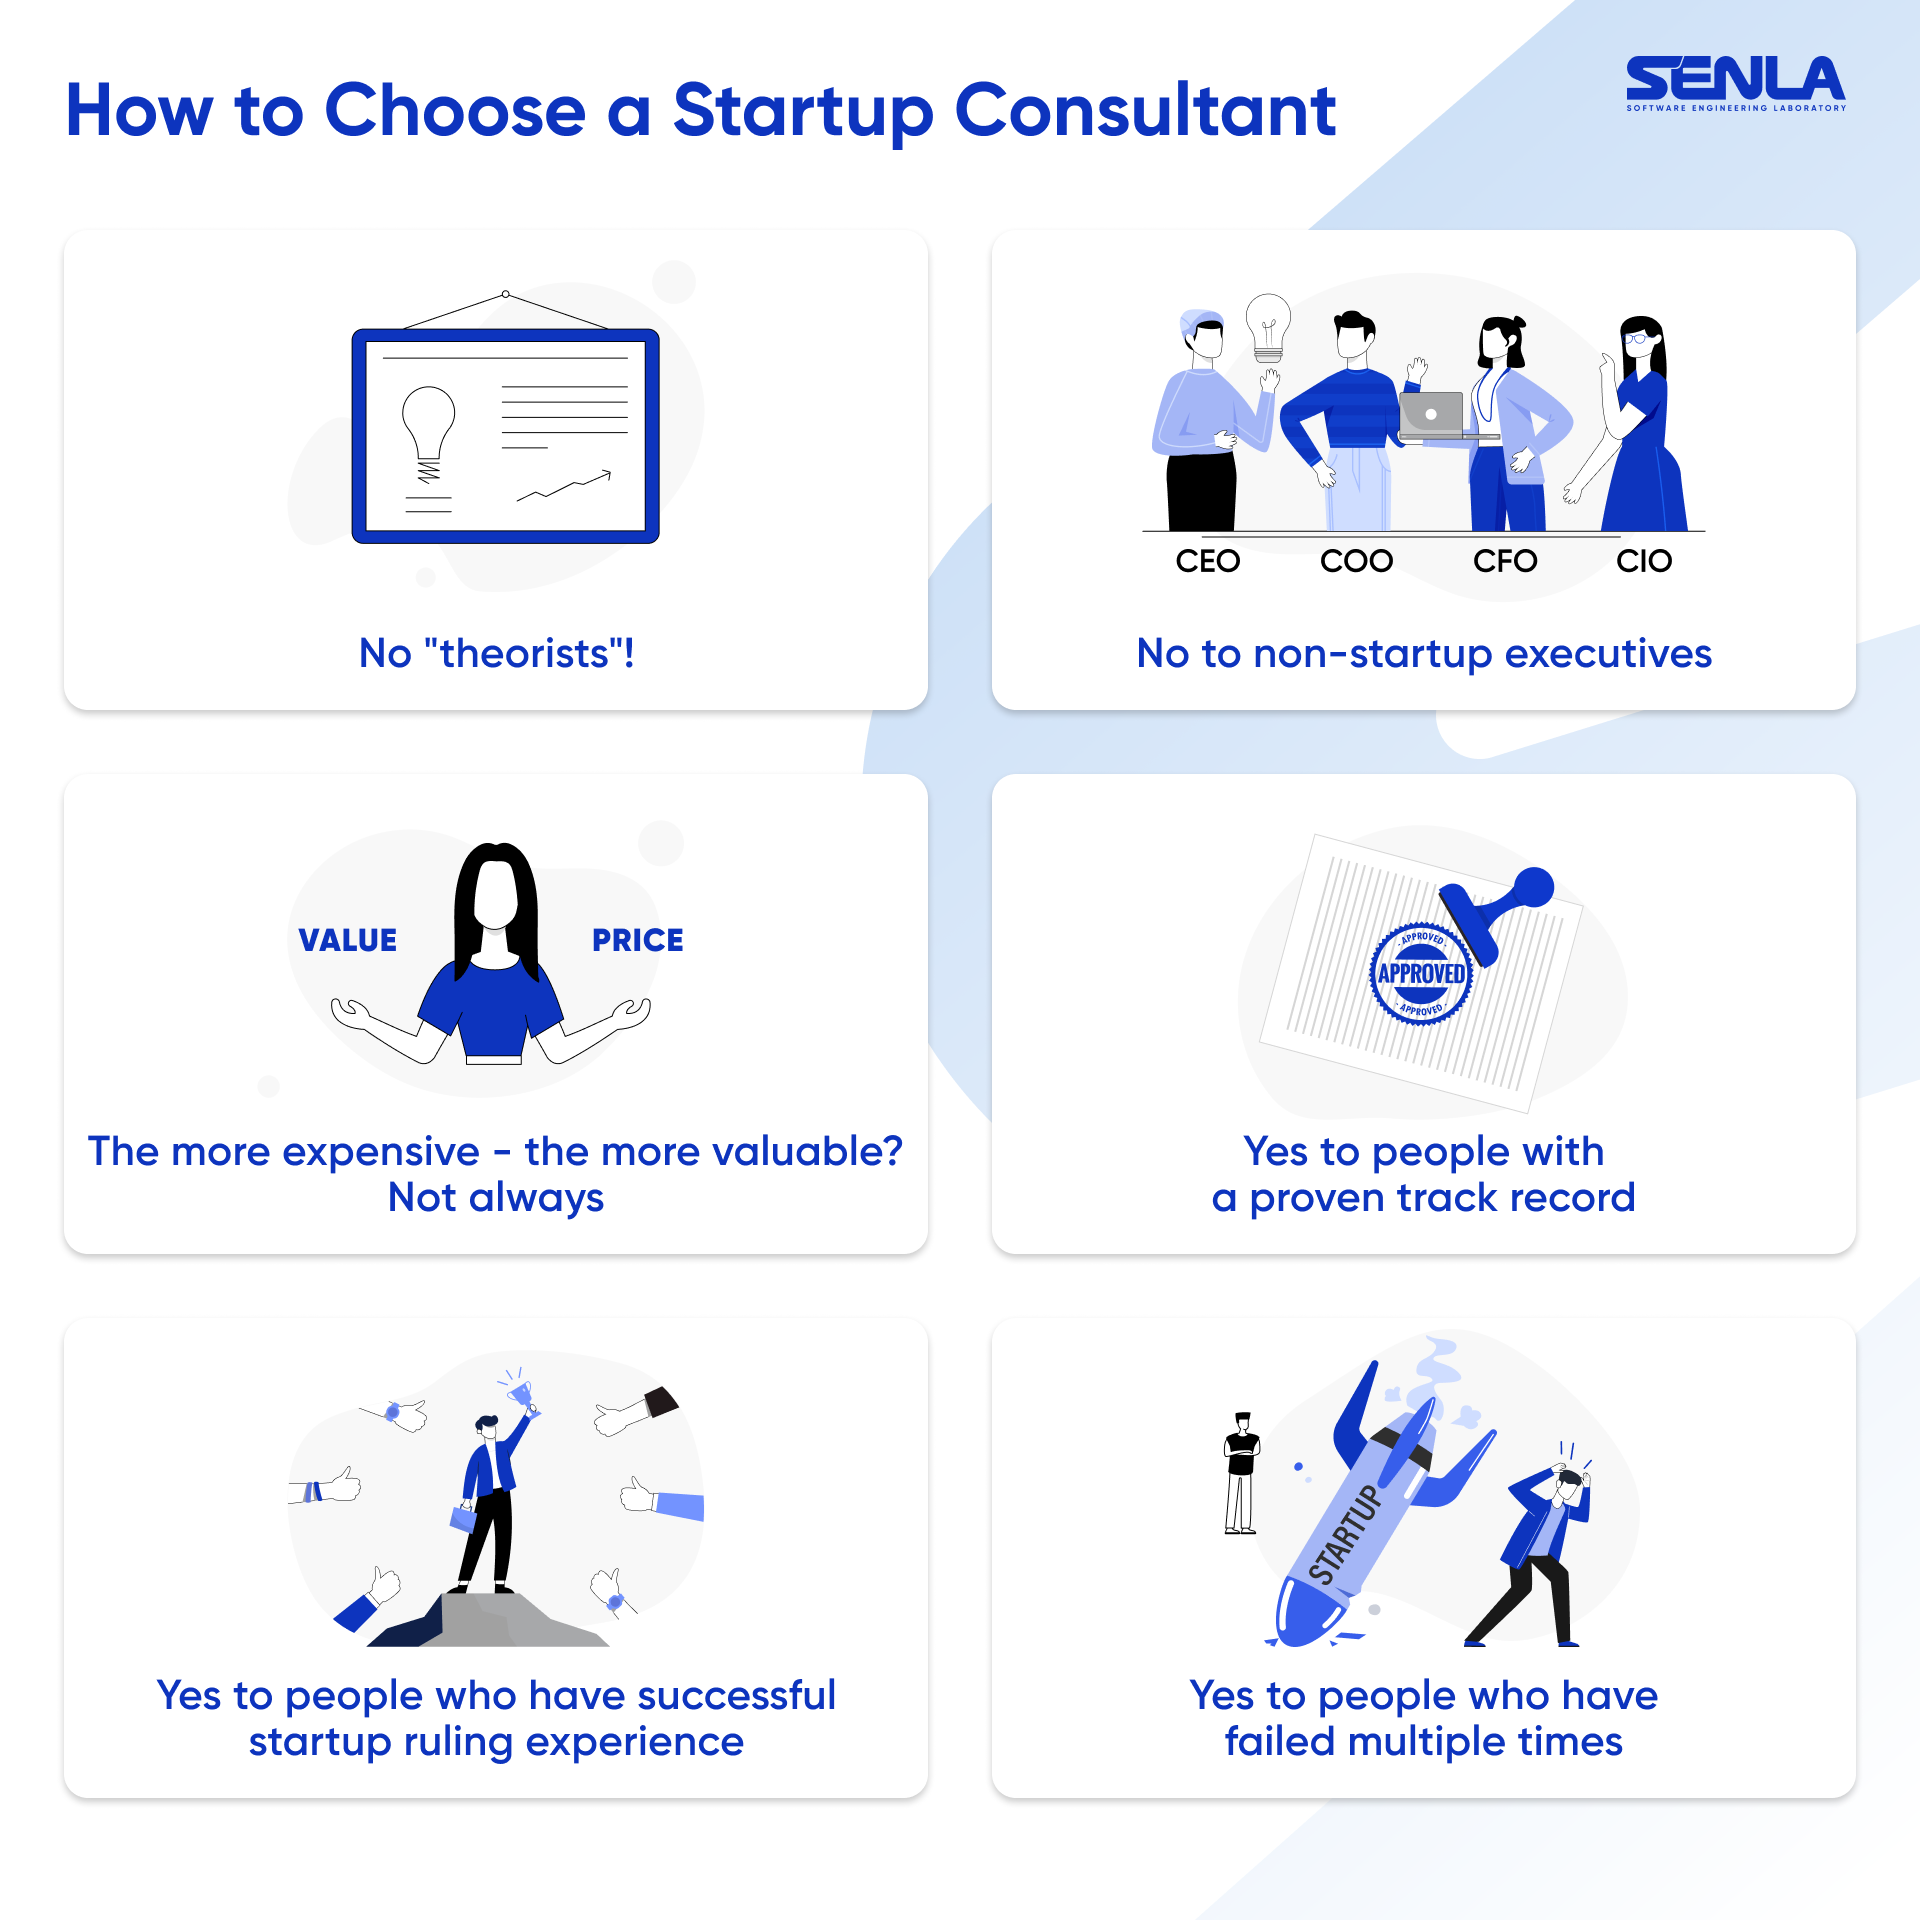 How to choose a startup consultant